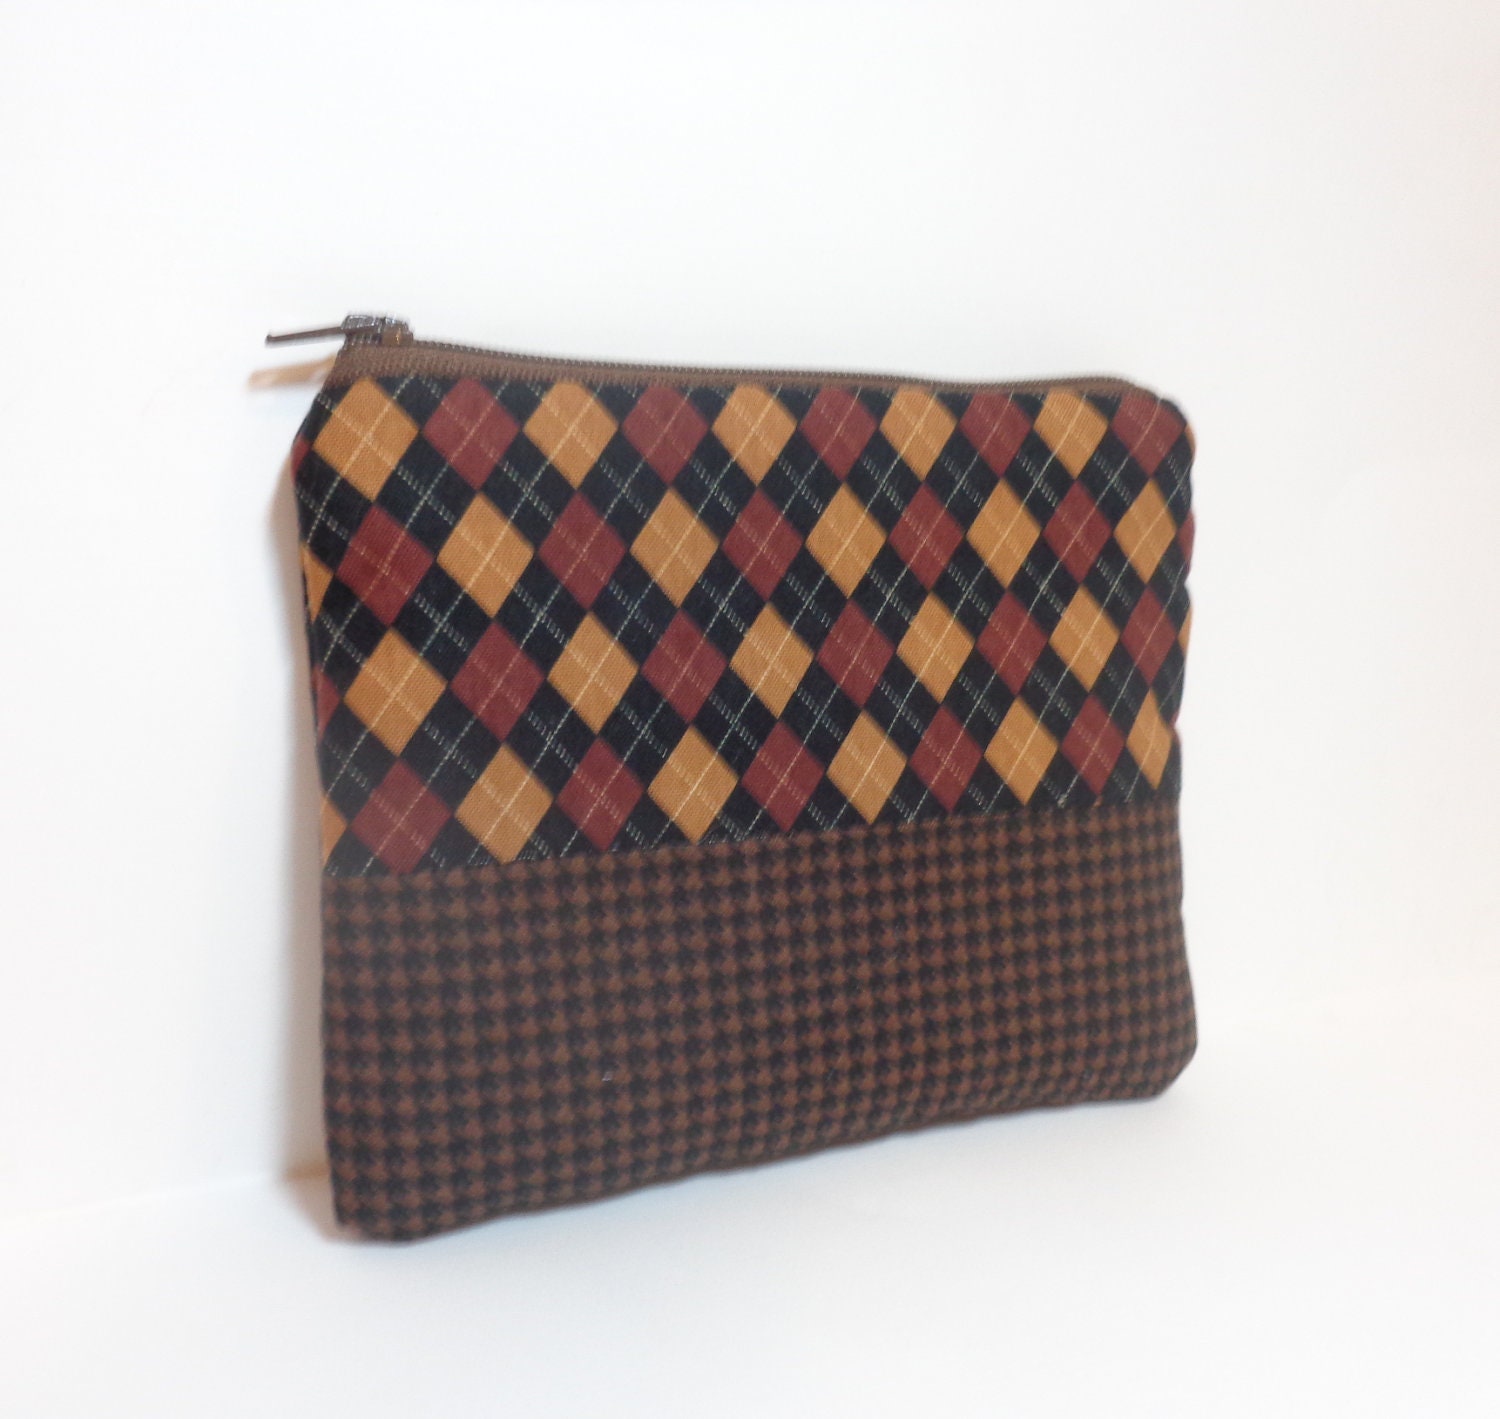 Small Pouch Small Wallet Small Coin Purse Argyle and Houndstooth in Brown - handjstarcreations